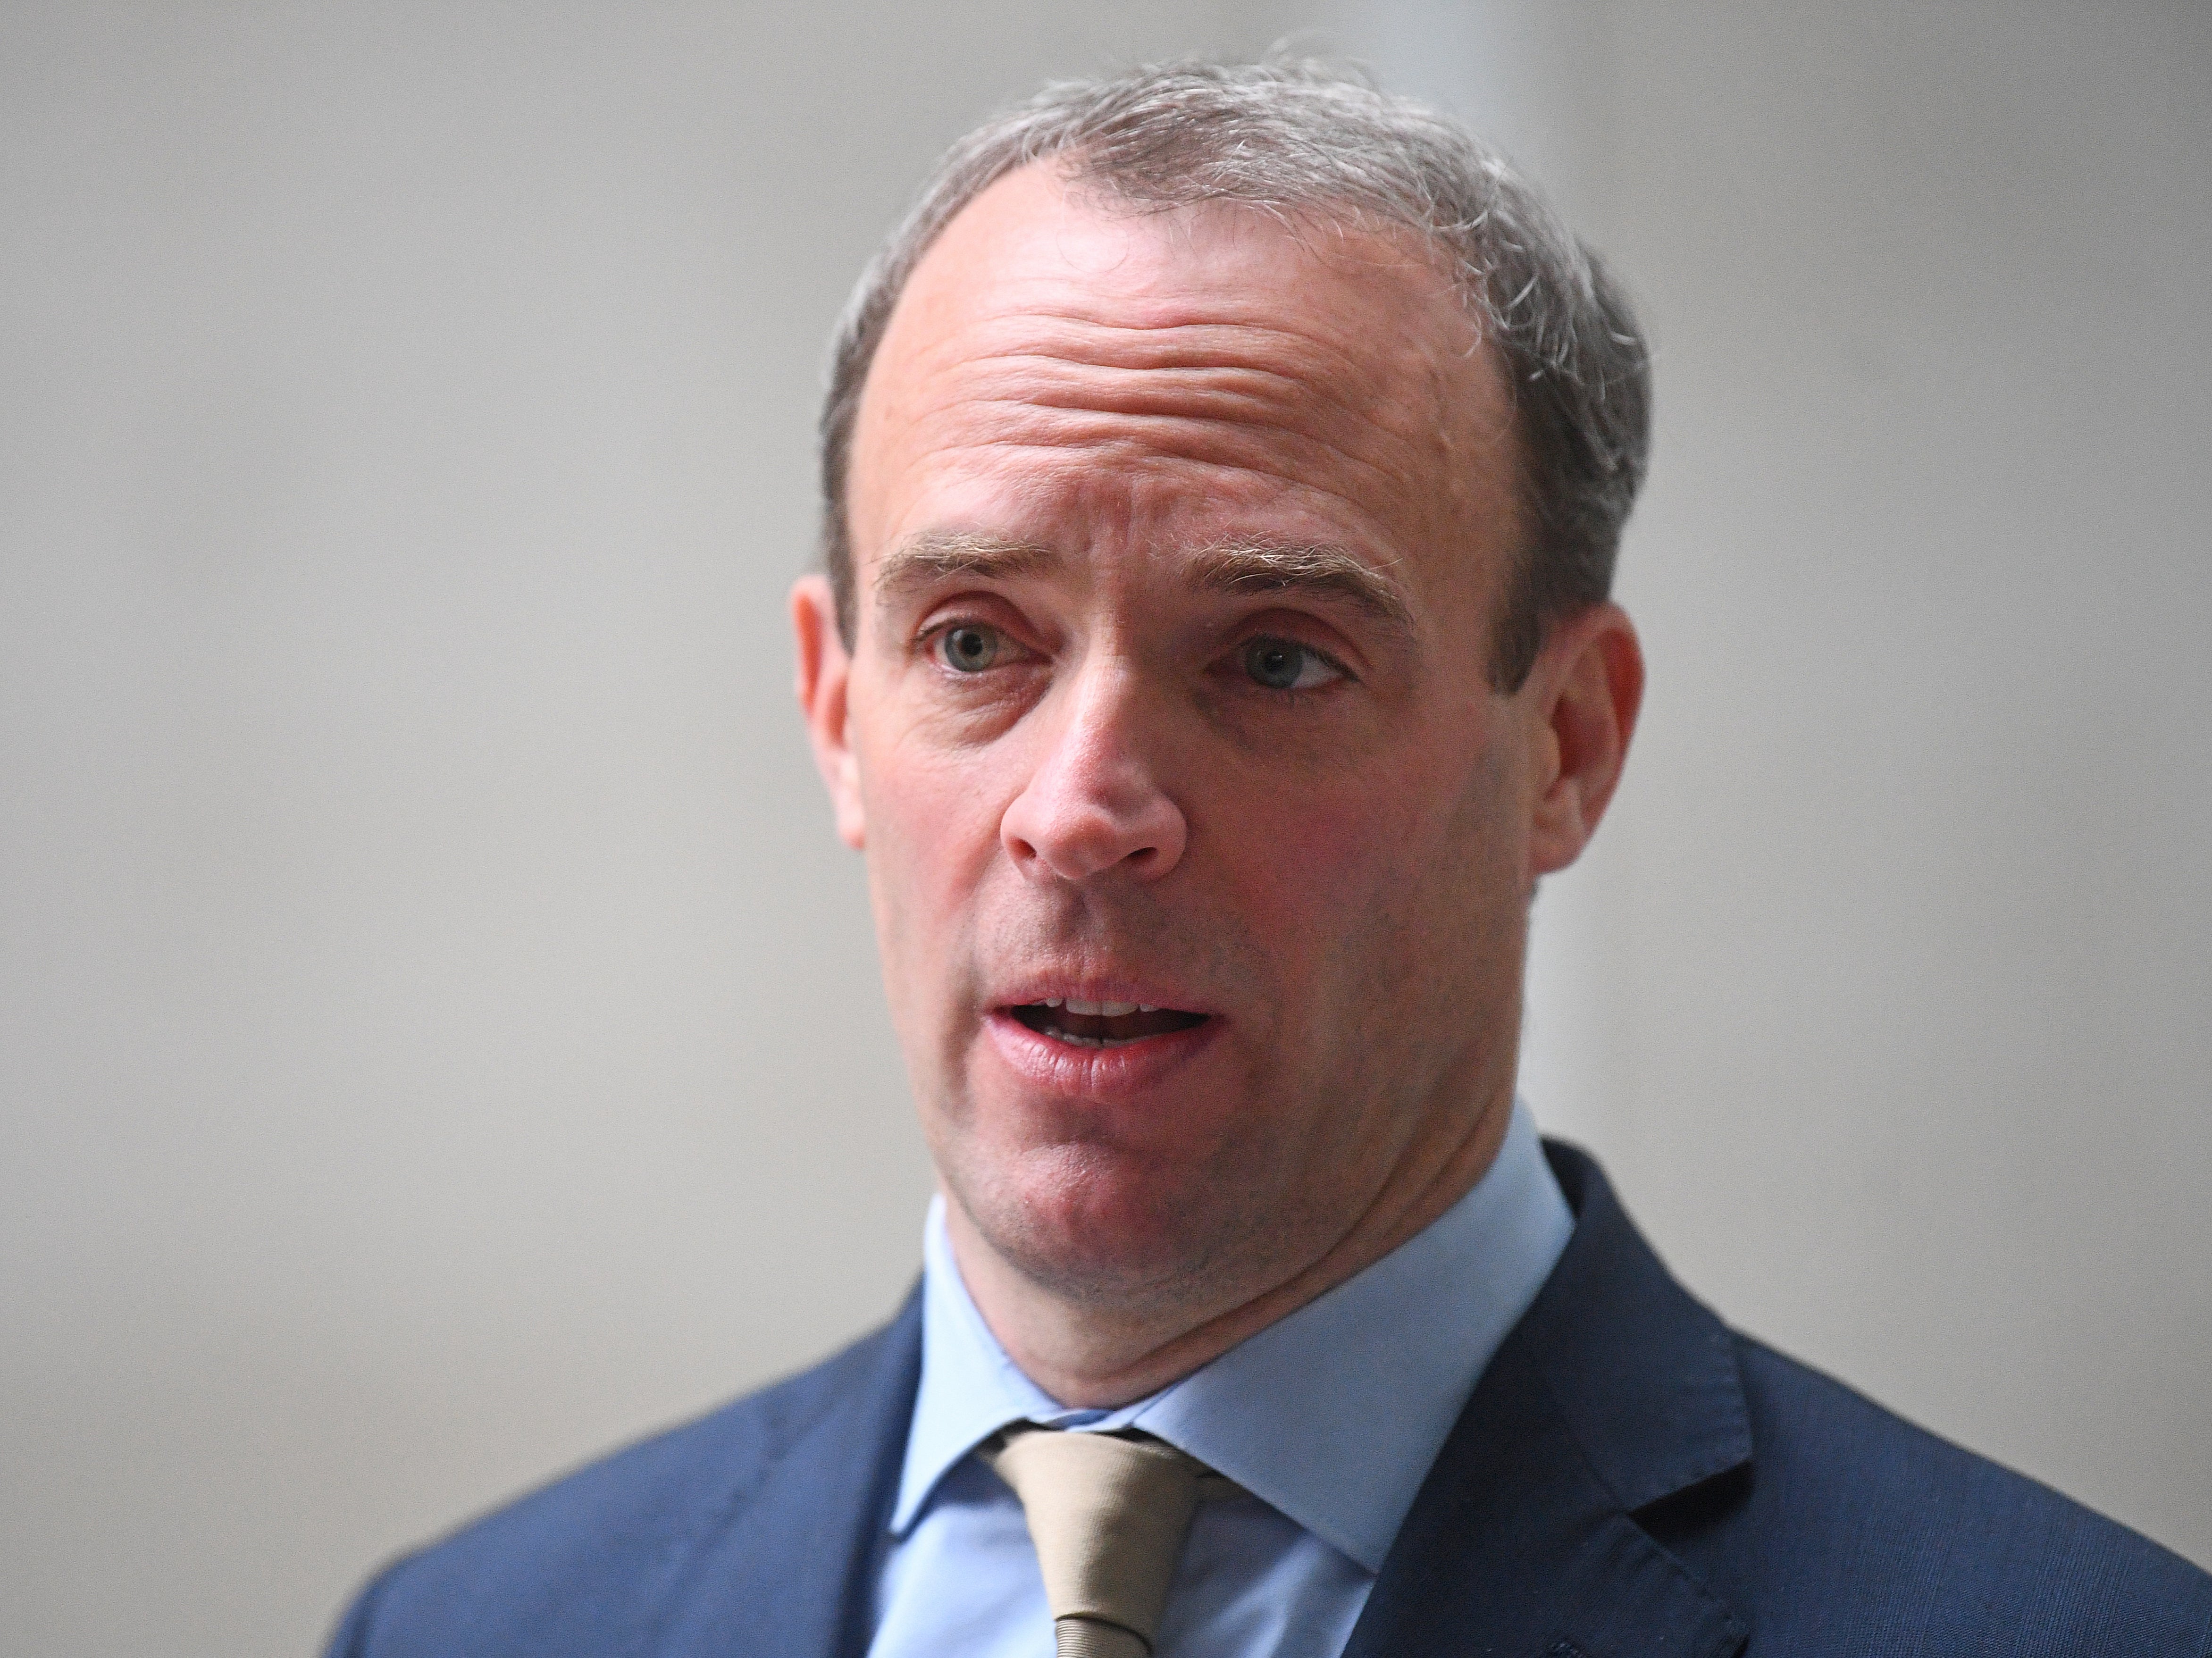 Dominic Raab says proposals ‘will give victims a louder voice, a greater role in the criminal justice system, and make criminals pay more to help victims recover’